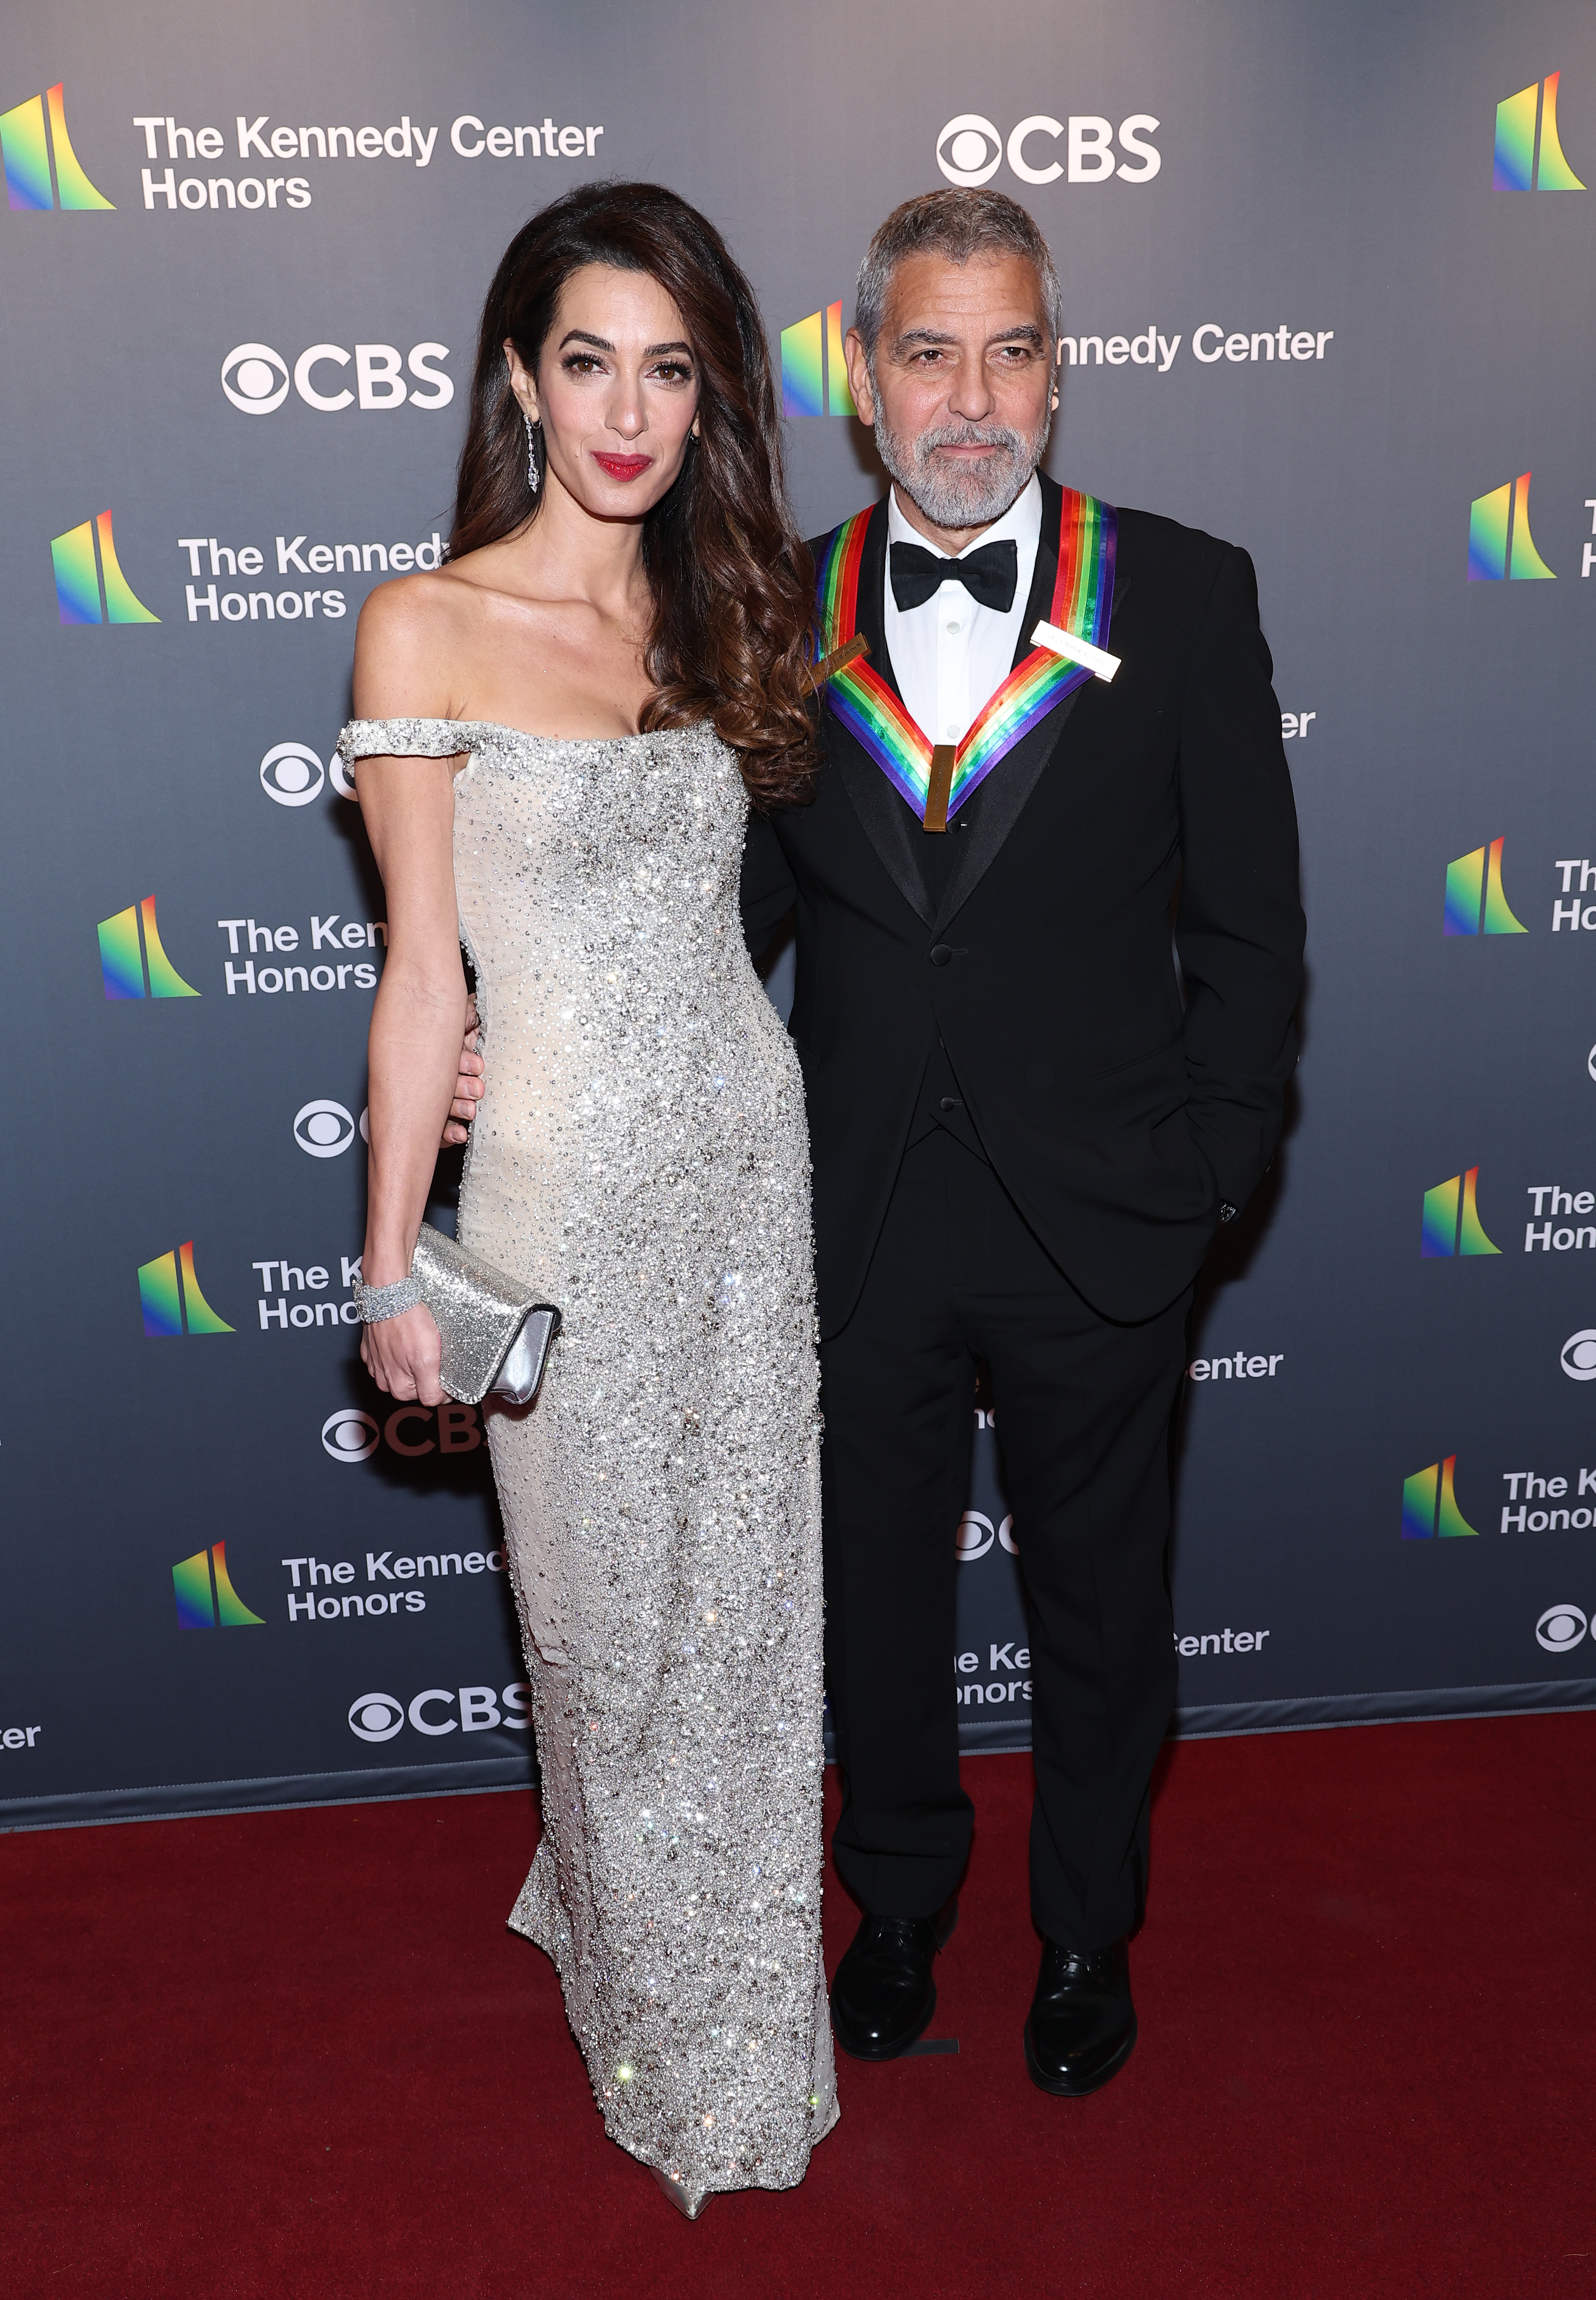 George and Amal Clooney attend the 45th Kennedy Center Honors ceremony on December 4, 2022 in Washington, DC | Source: Getty Images